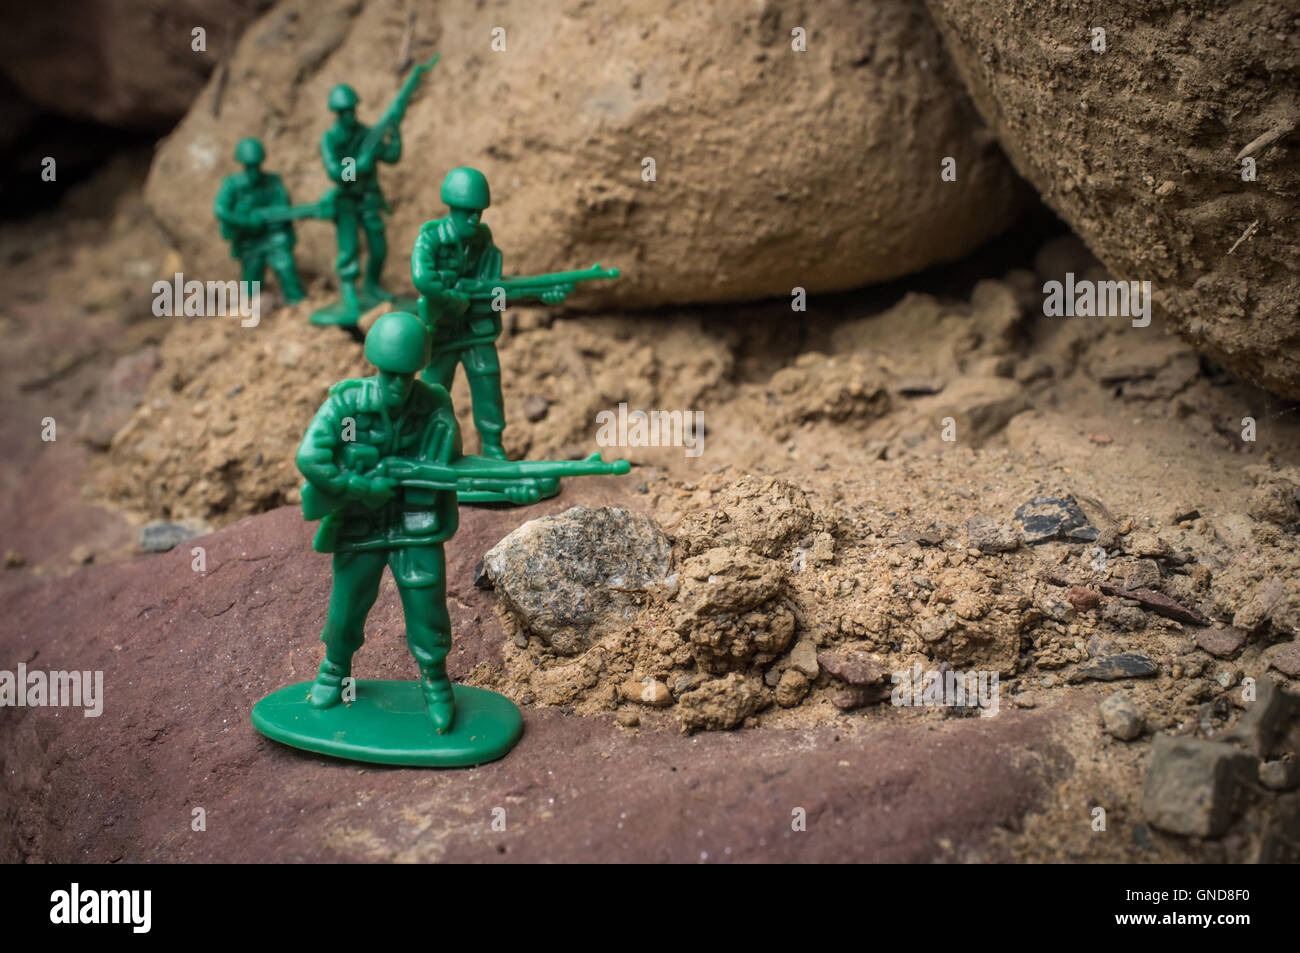 Toy soldiers march along rocky cliffs in natural environment Stock Photo